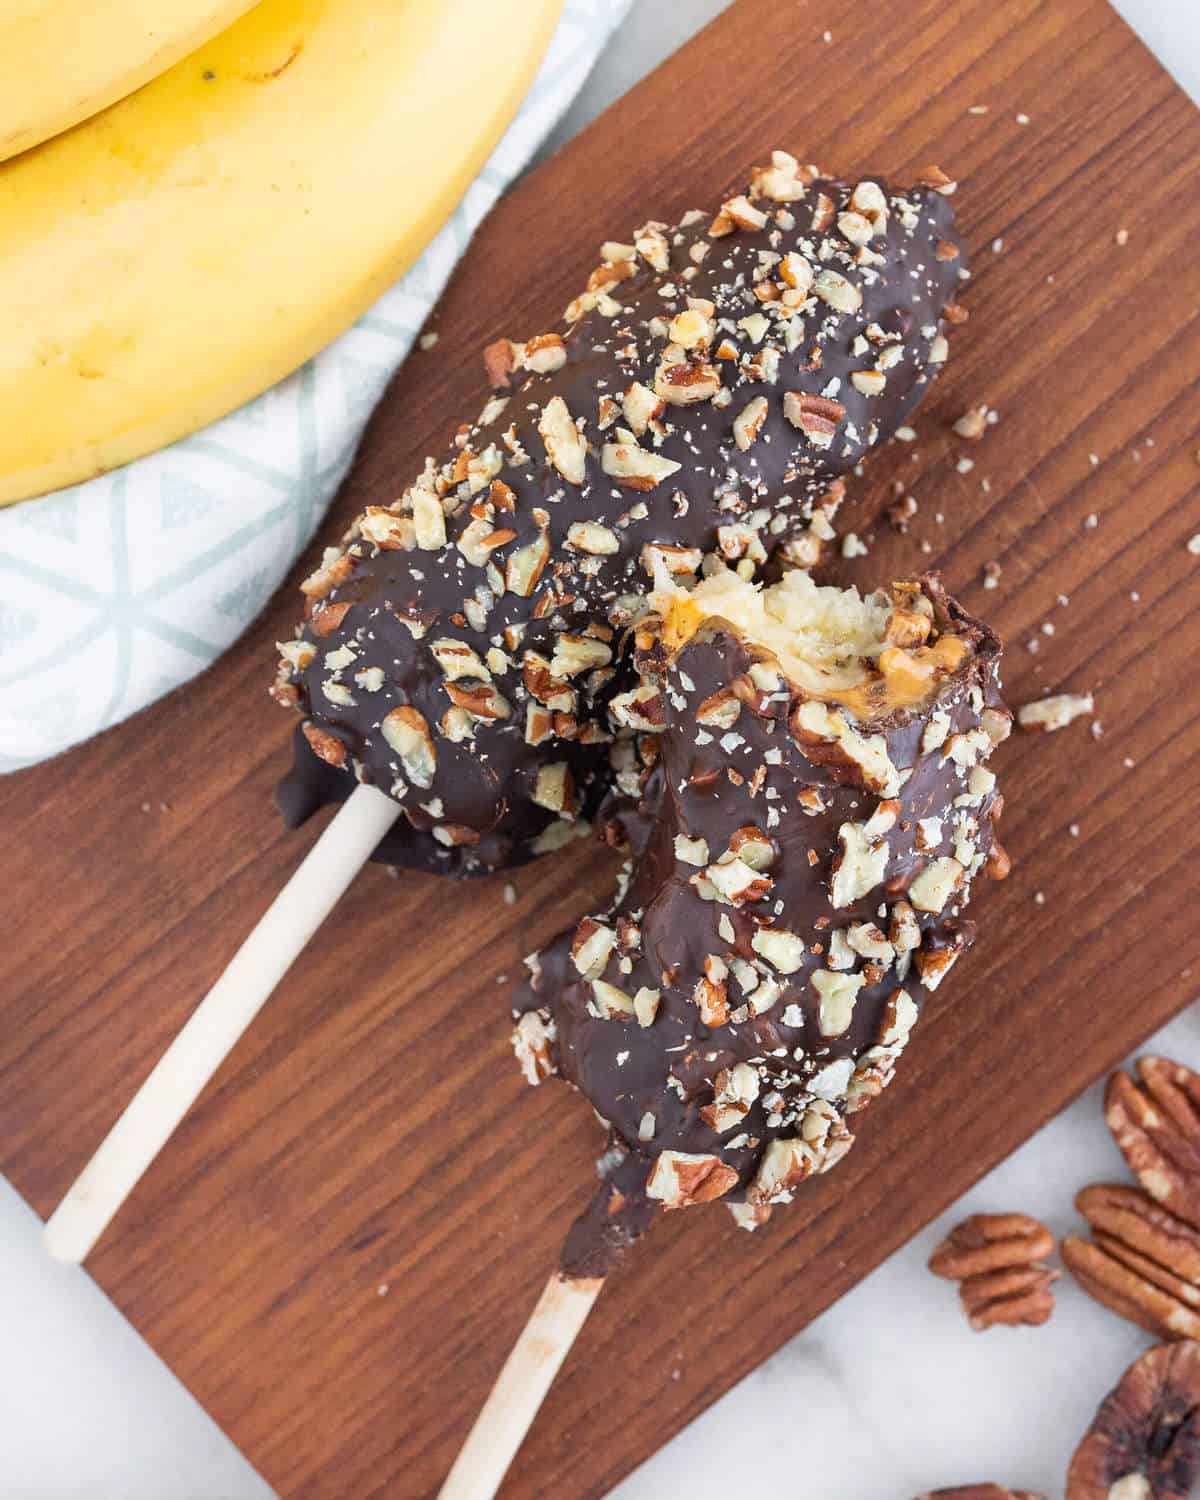 Chocolate covered peanut butter bananas on a wood board.